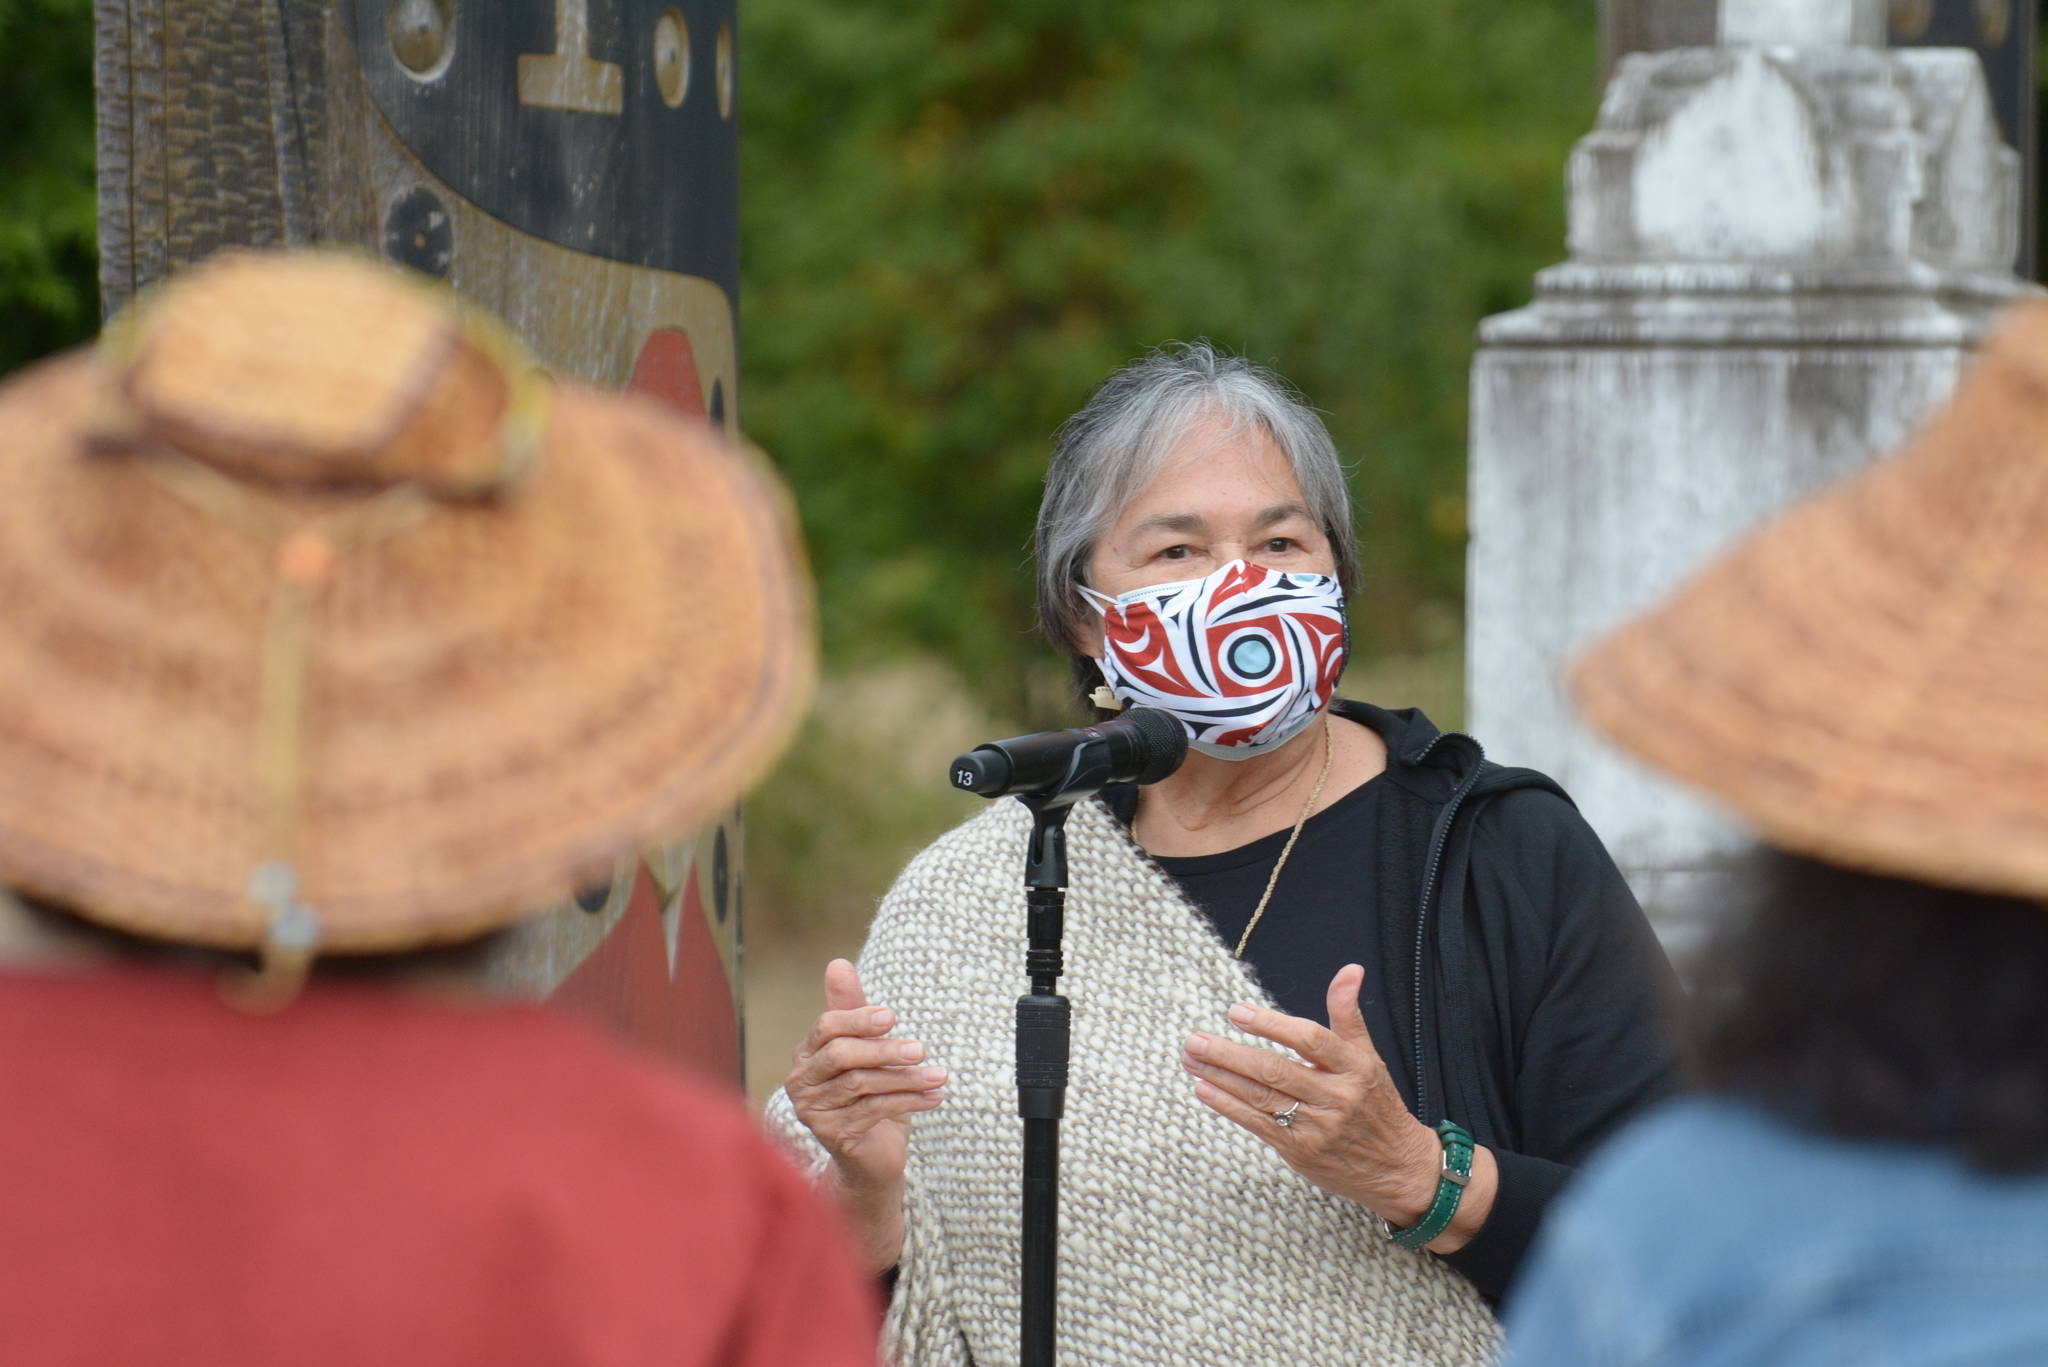 Suquamish Elder Marilyn Wandery presides over ceremonies at Chief Seattle’s gravesite in Suquamish at the opening Chief Seattle Days events on Saturday. (Photo by Jon Anderson/Courtesy of Suquamish Tribe)